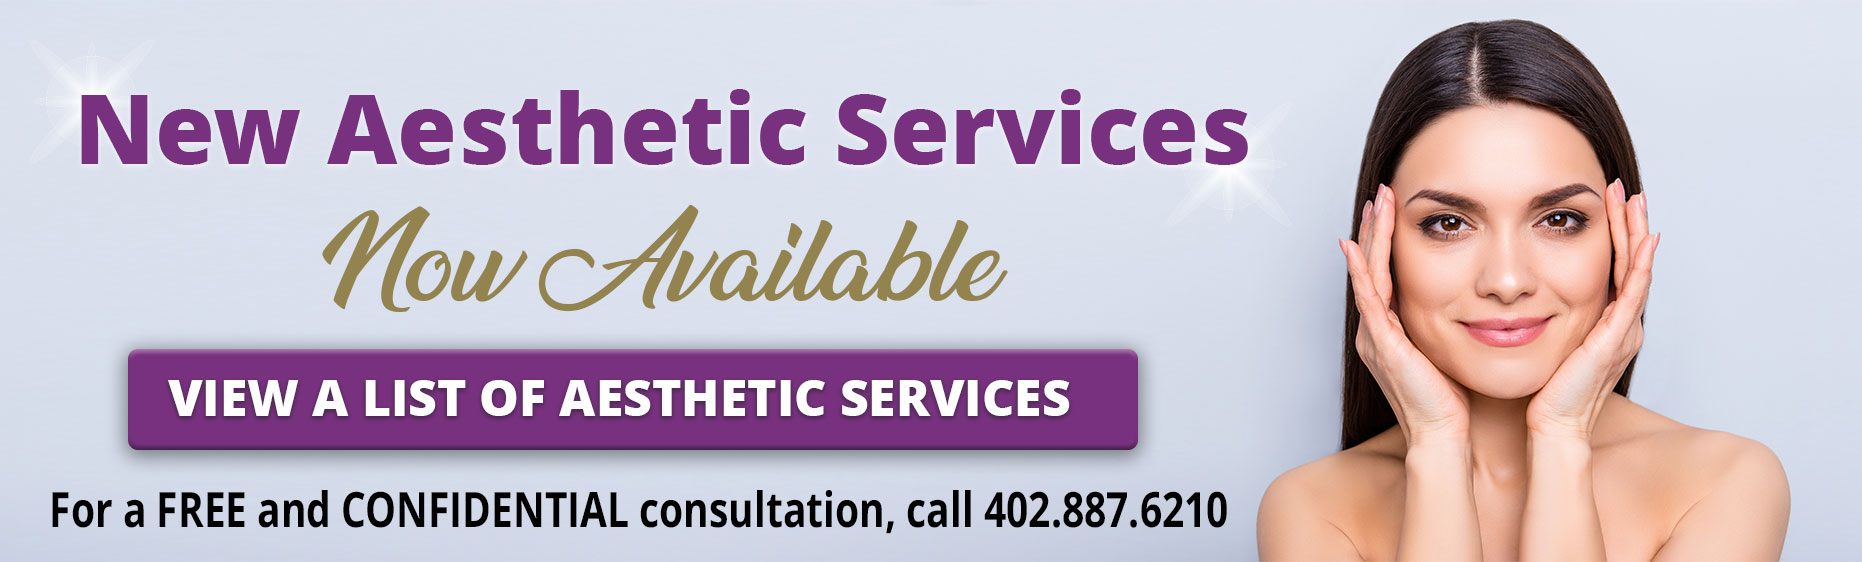 New Aesthetic Services Now Available

“Click here for a list of aesthetic services”

“For a FREE and CONFIDENTIAL consultation, call 402.887.6210”